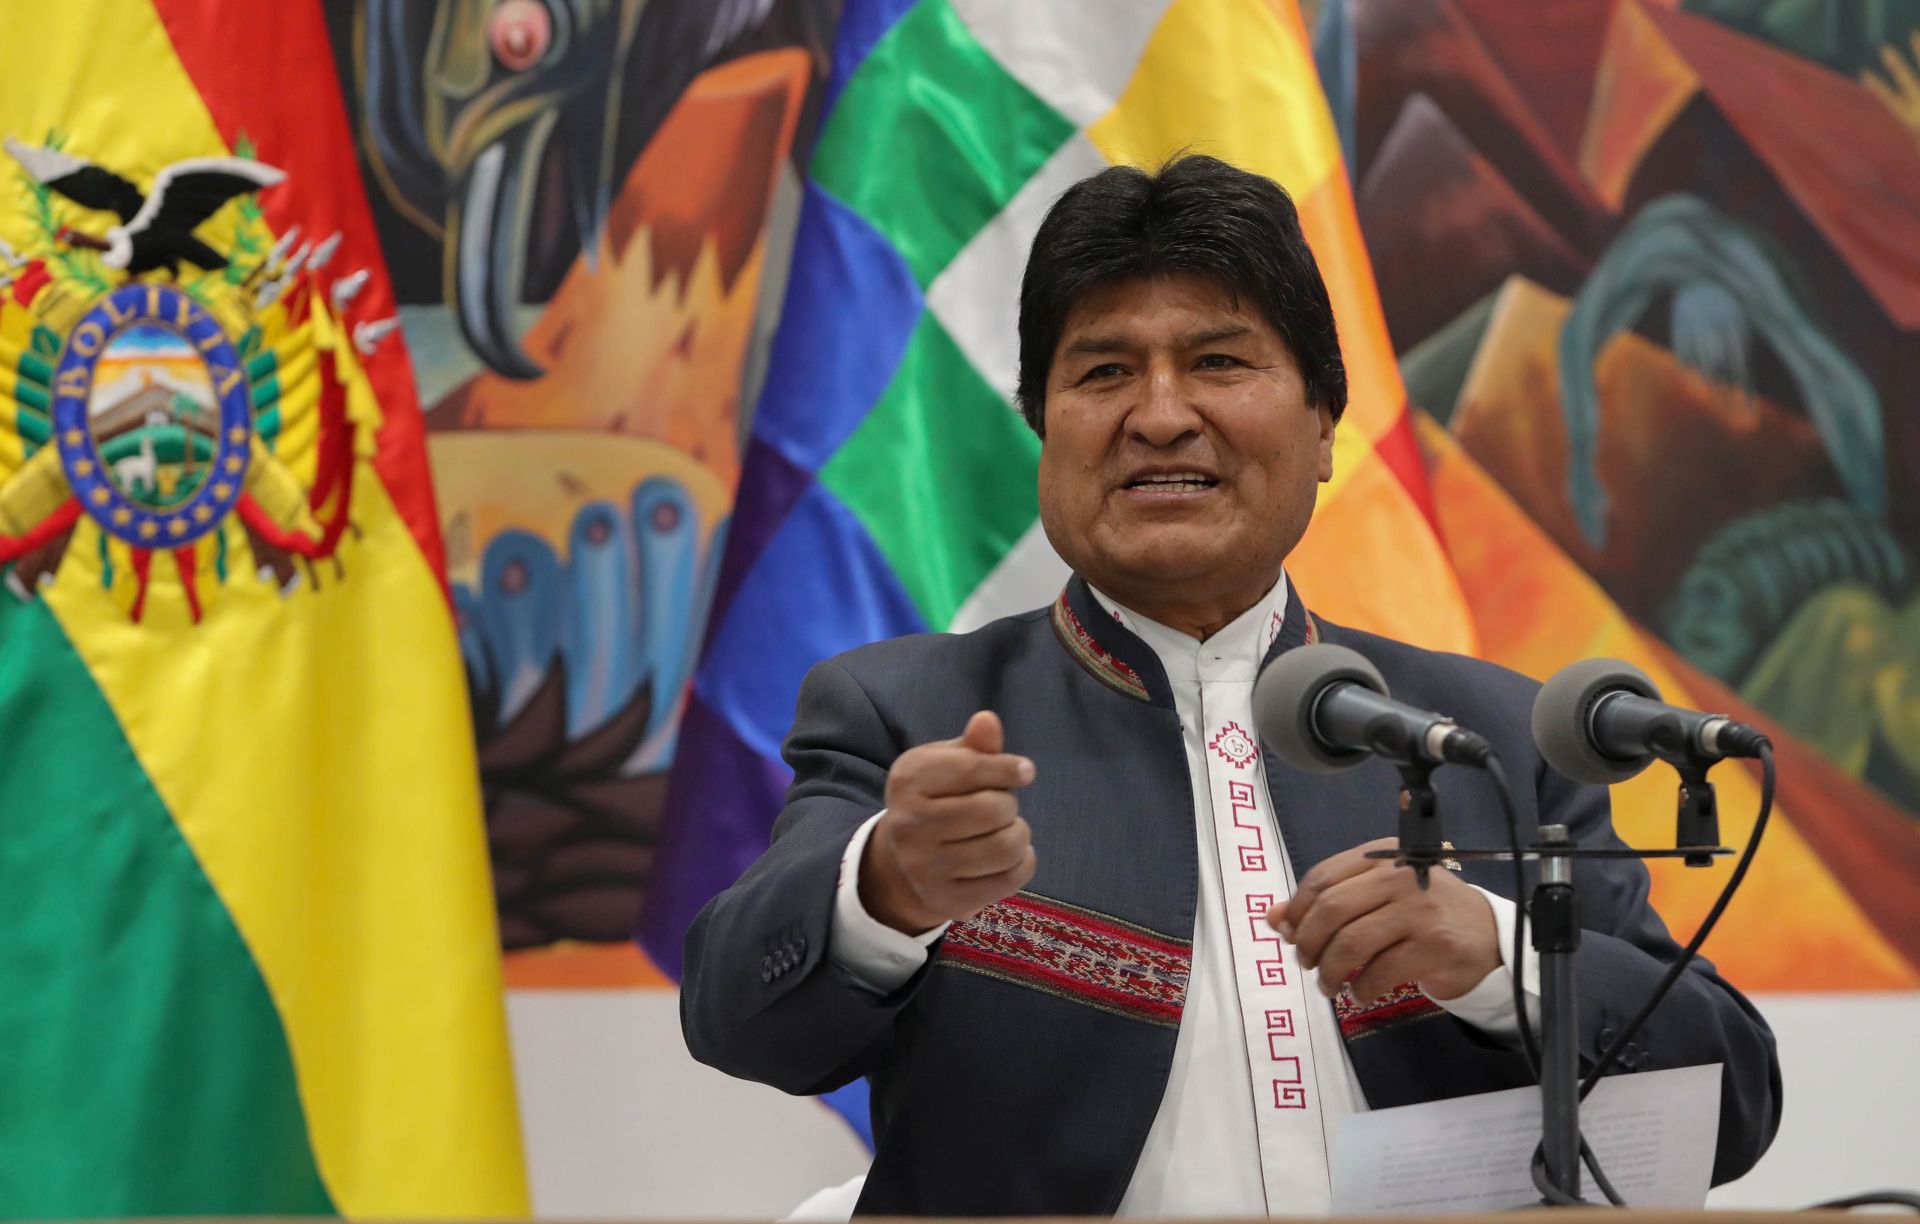 epa07945999 Bolivia's President Evo Morales, speaks during a press conference in La Paz, Bolivia, 24 October 2019. Morales said that he will go to the second round if he fails to win in the first round, although he hopes that the final count will give him the victory without waiting for another election round. The president's statements come after the Organization of American States (OEA) on 23 October that urged for a second round no matter what happens with the calculation of this first, to clear suspicions of electoral fraud.  EPA/MARTIN ALIPAZ